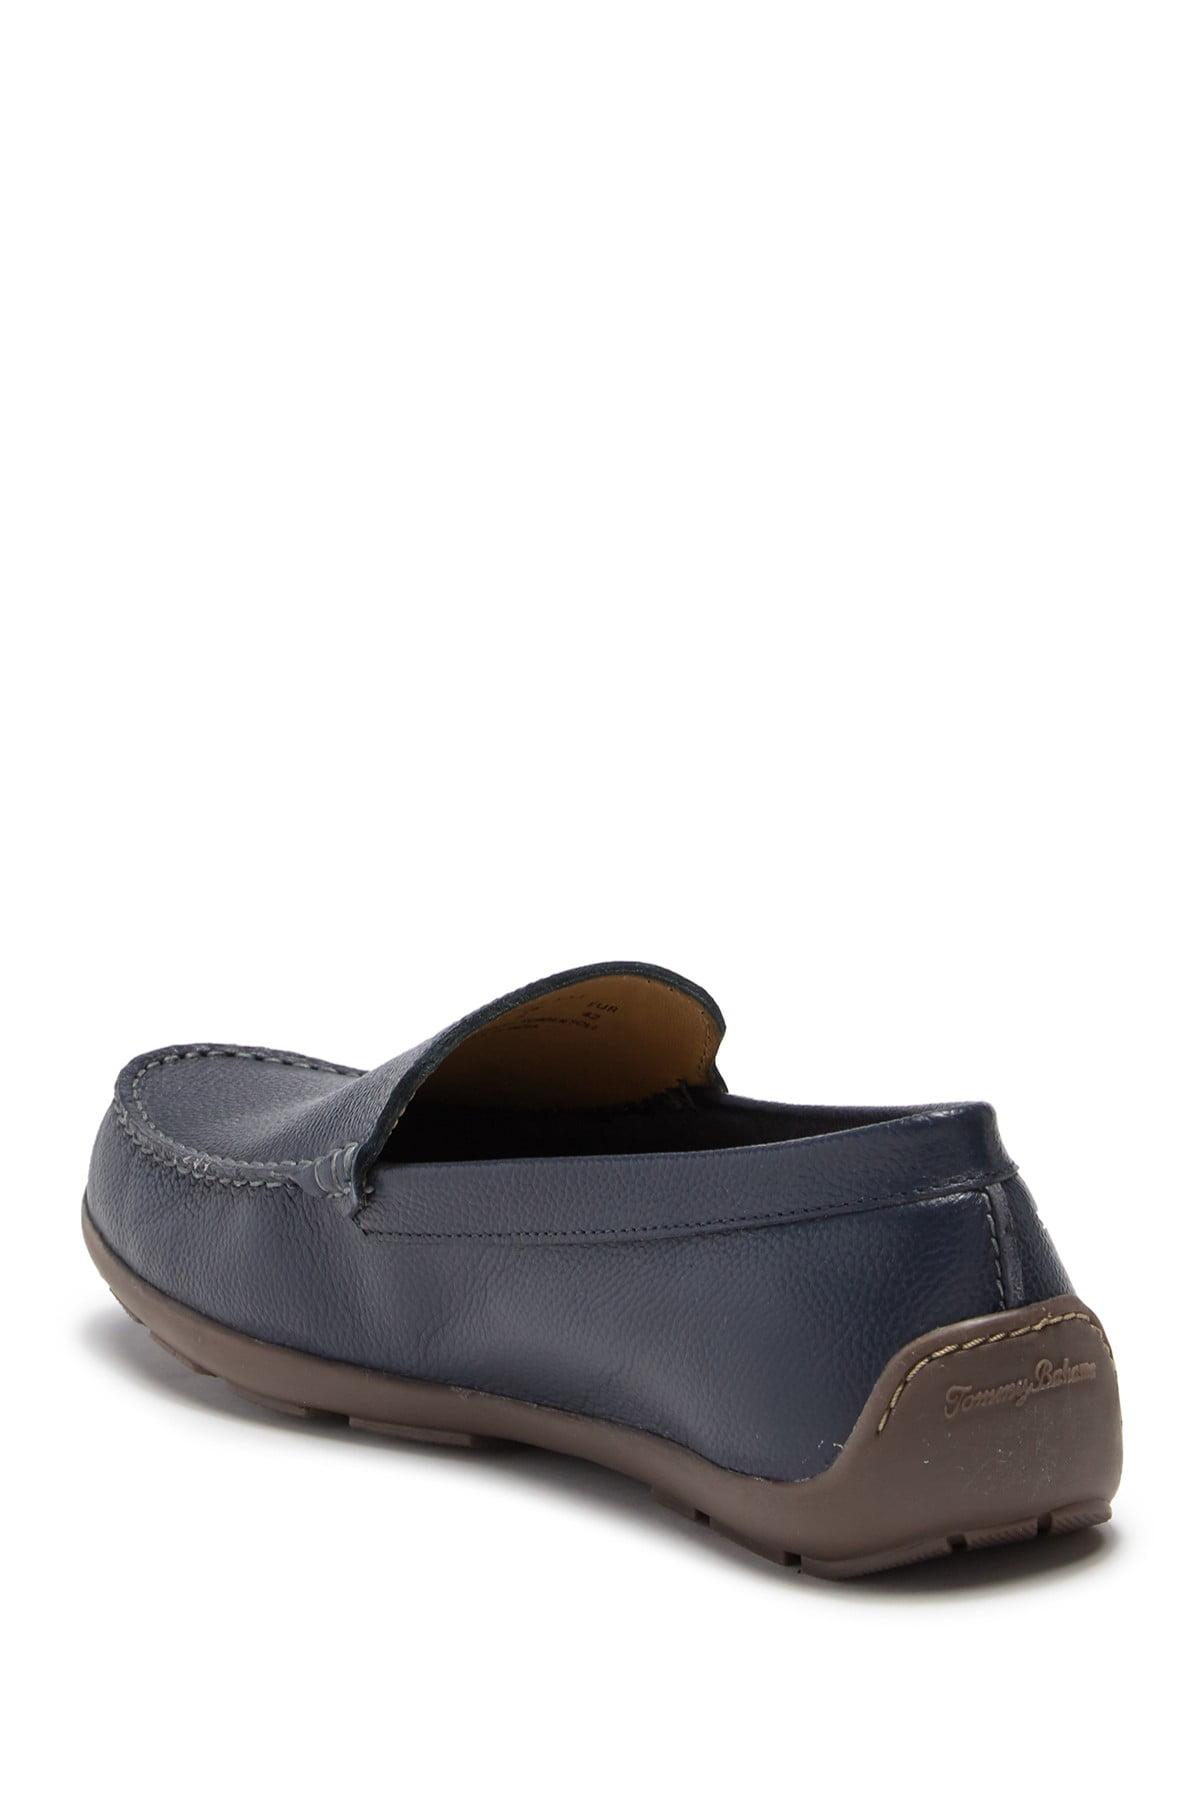 Tommy Bahama Acanto Leather Loafer in 